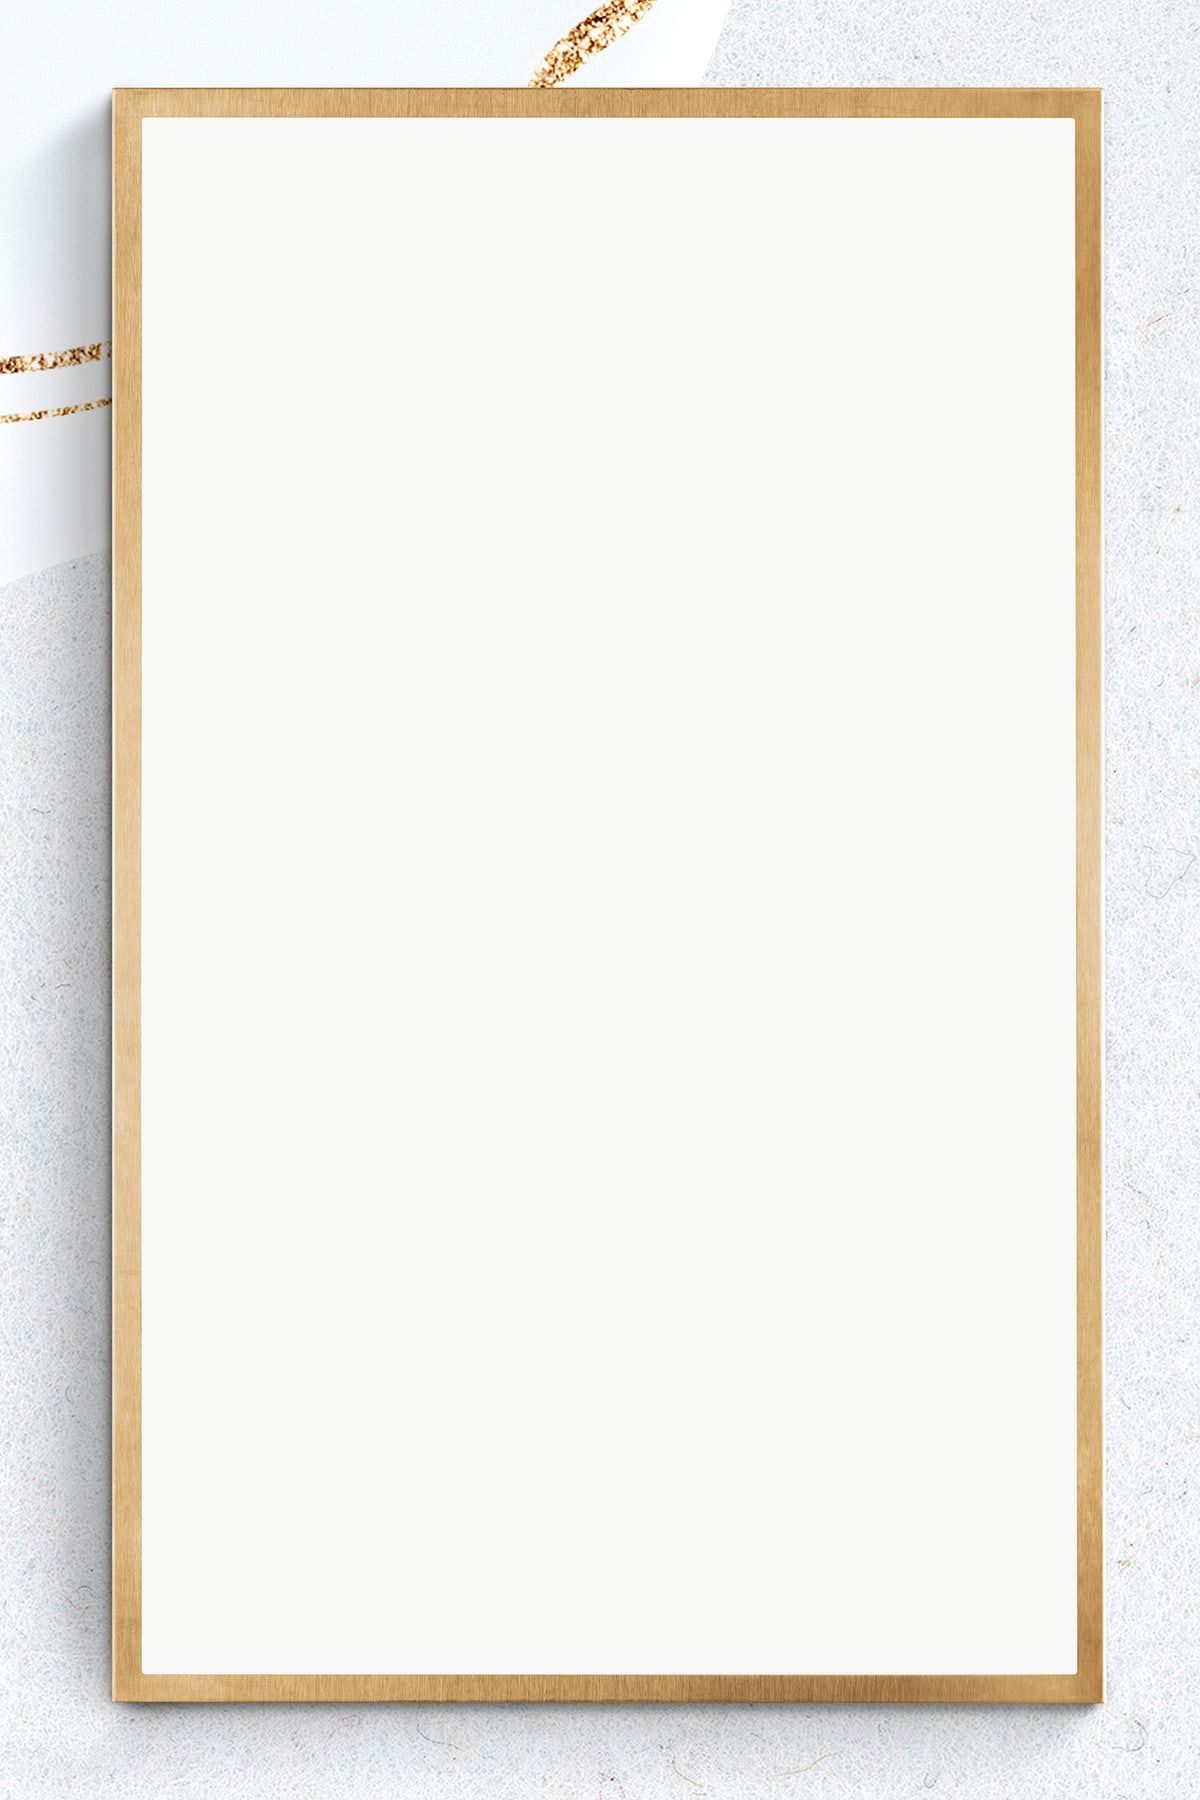 Download free png of Png gold frame transparent background by Sasi about gold frame rectangle,...jpg